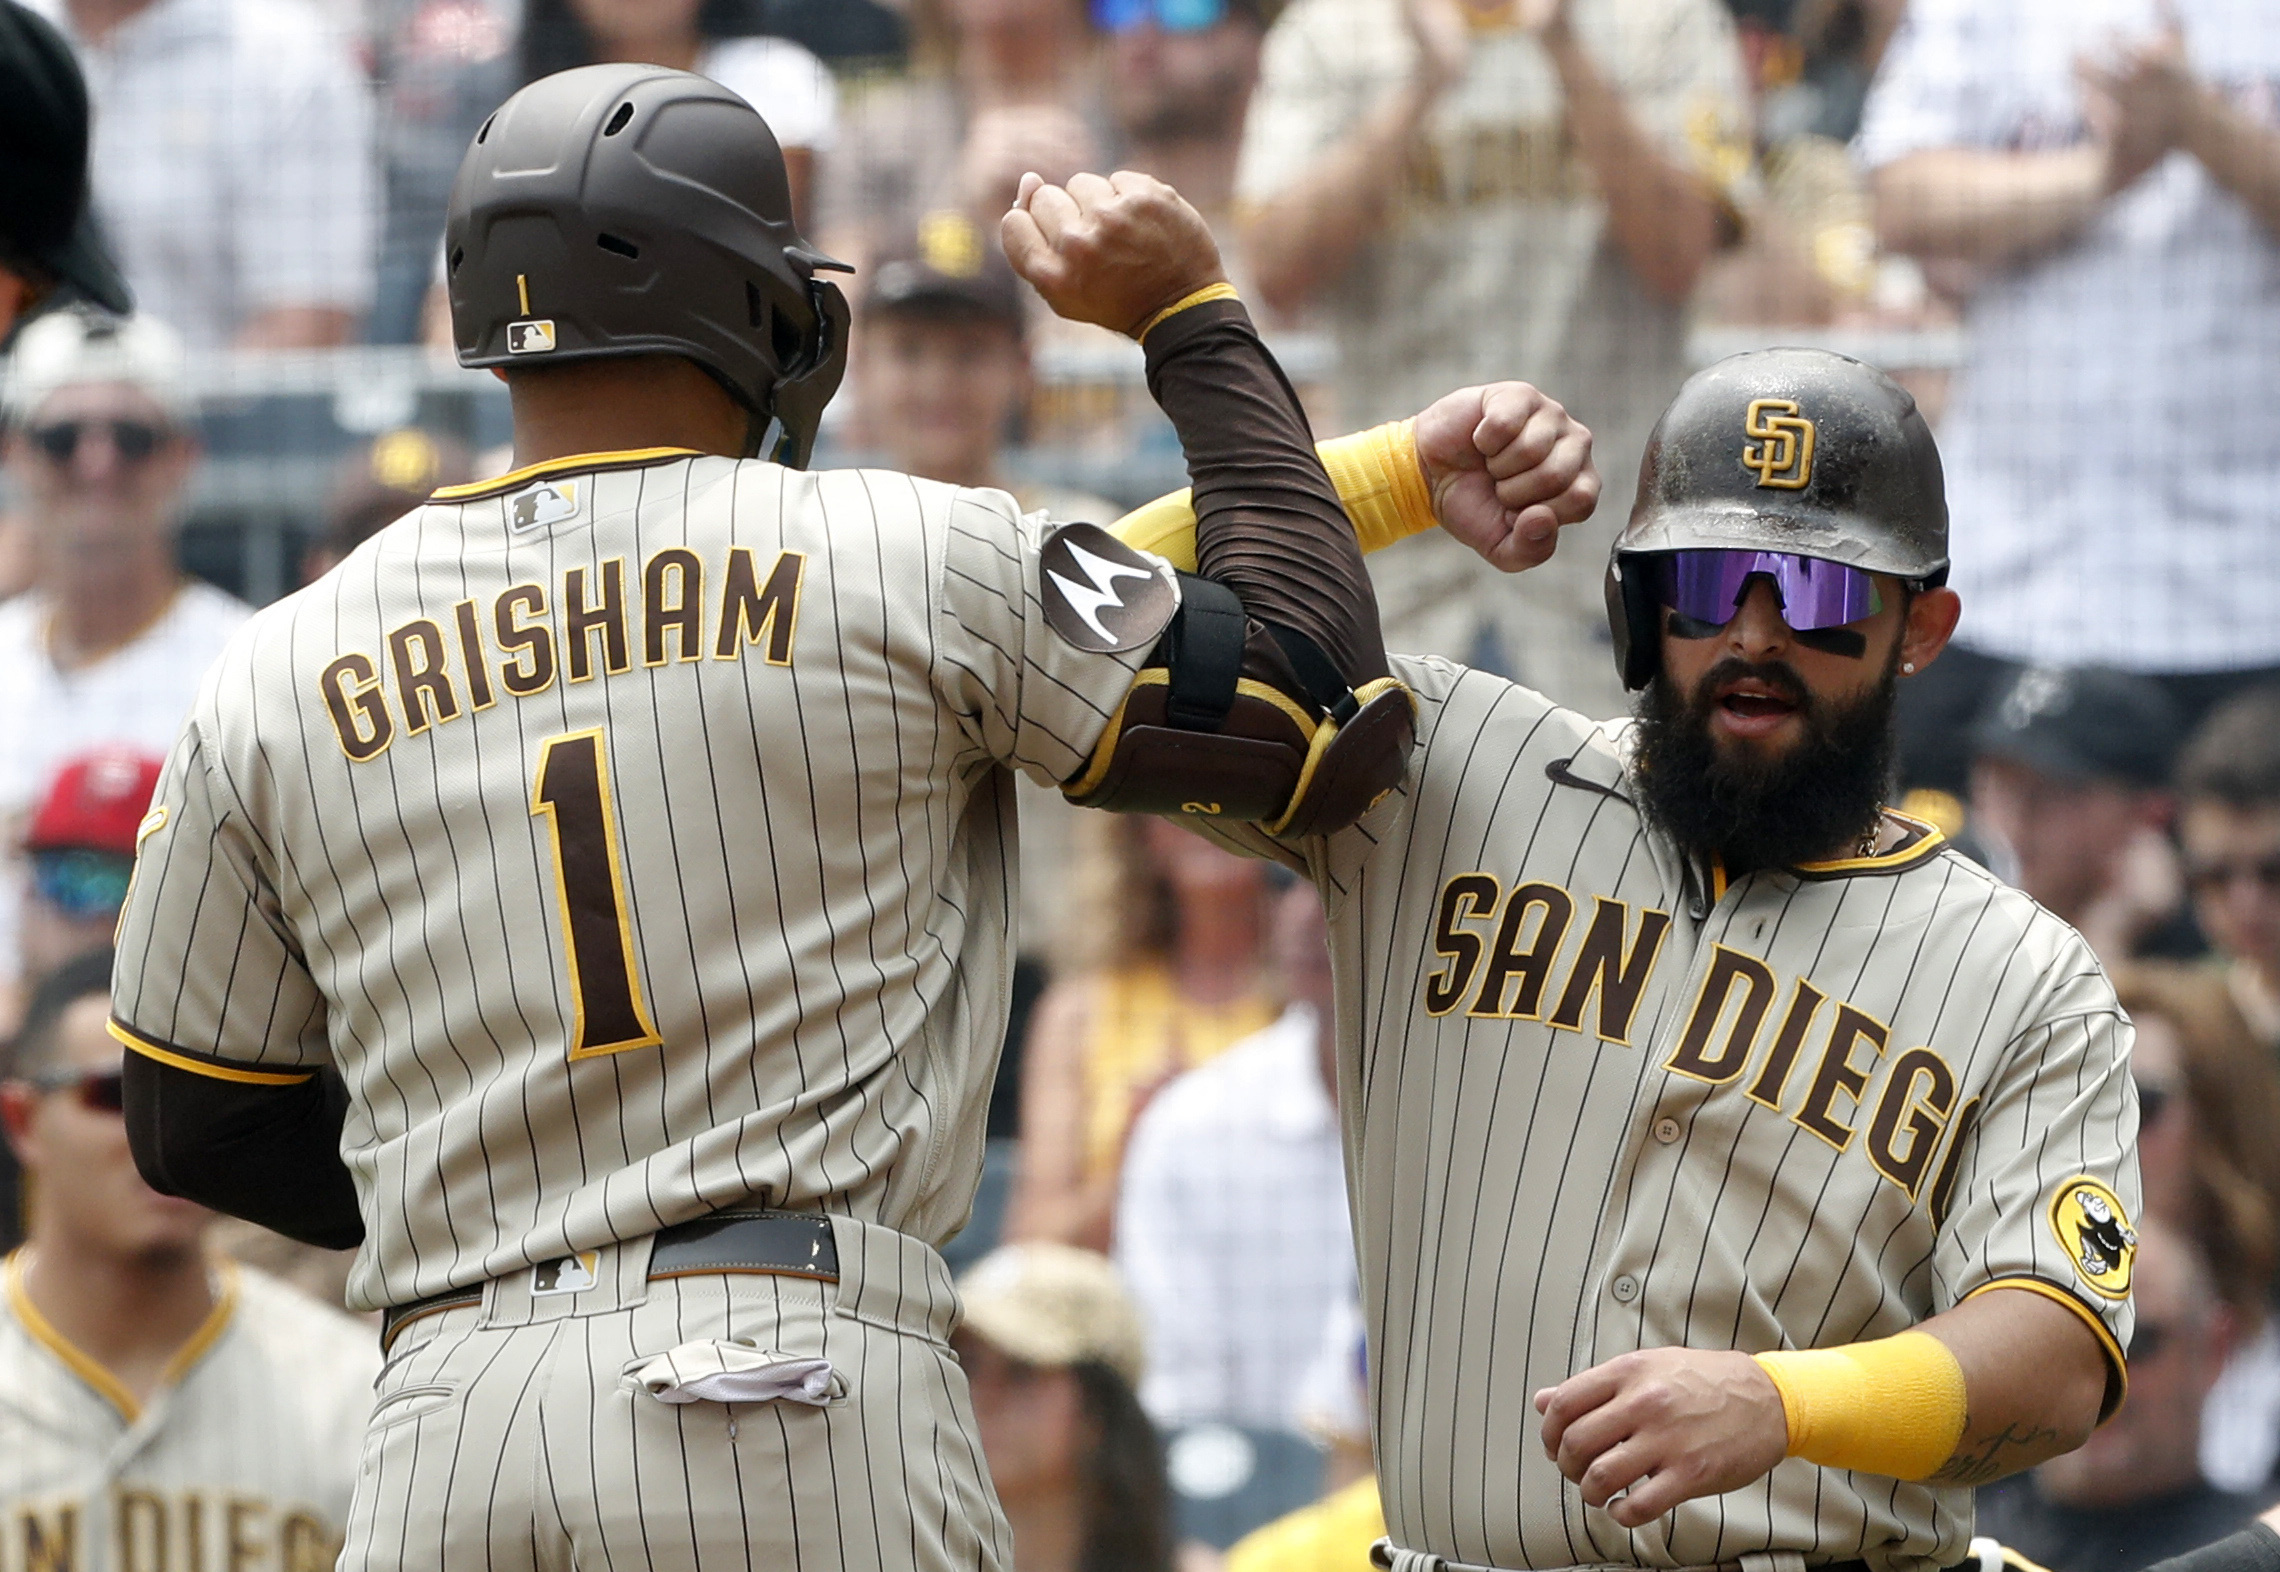 Pirates-Padres game delayed 45 minutes due to poor air quality